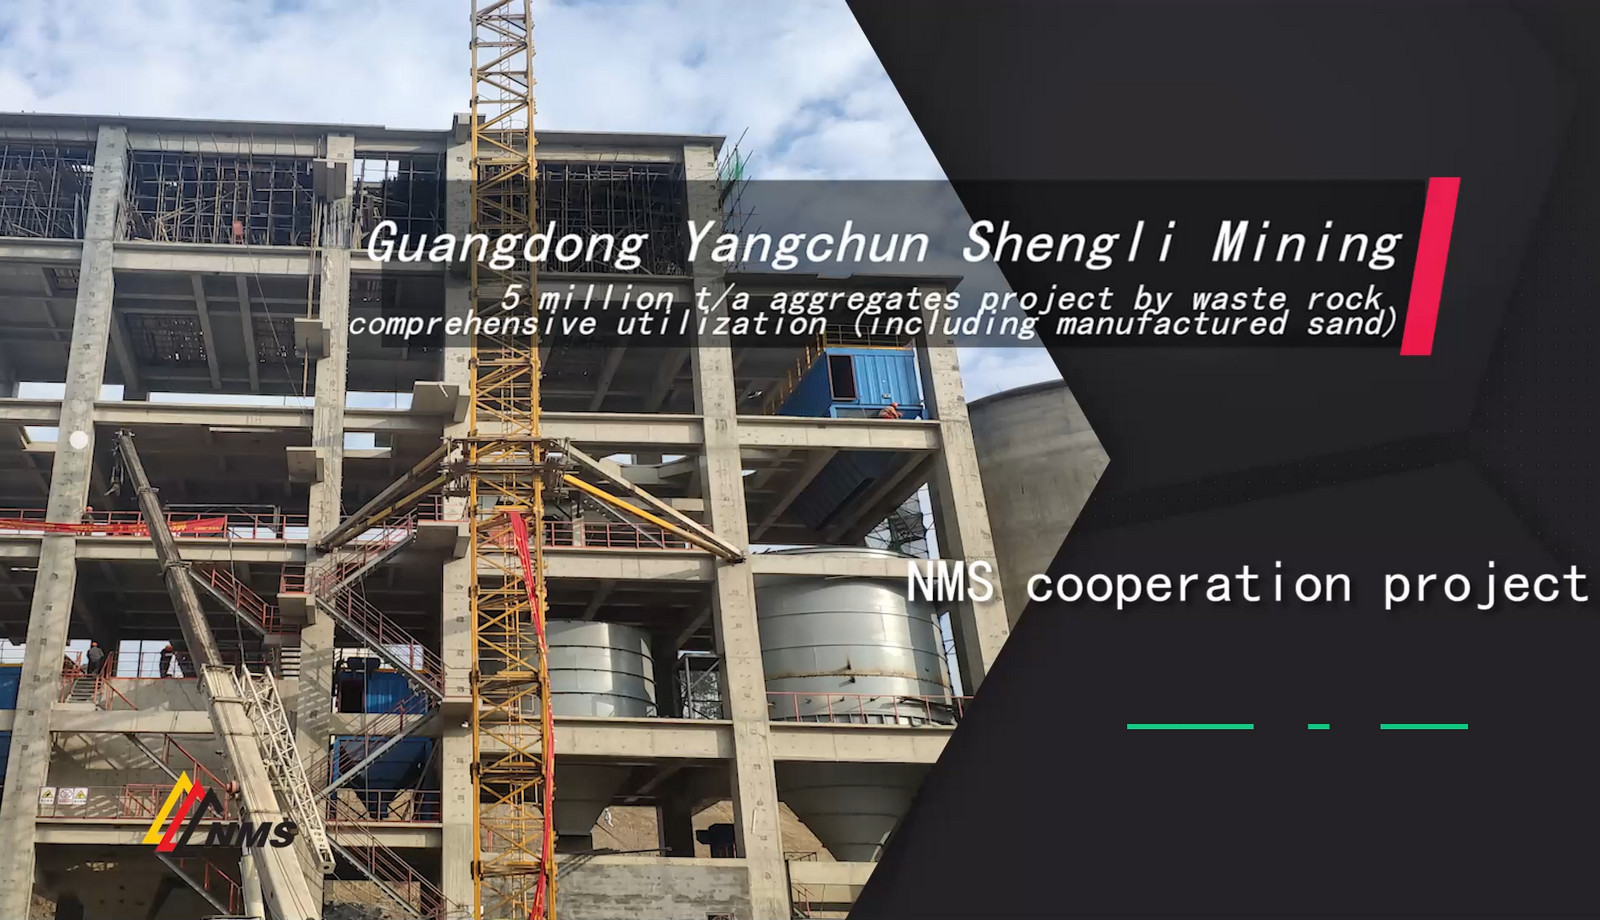 Let's See NMS Cooperation Project by Guangdong Yangchun Shengli Mining